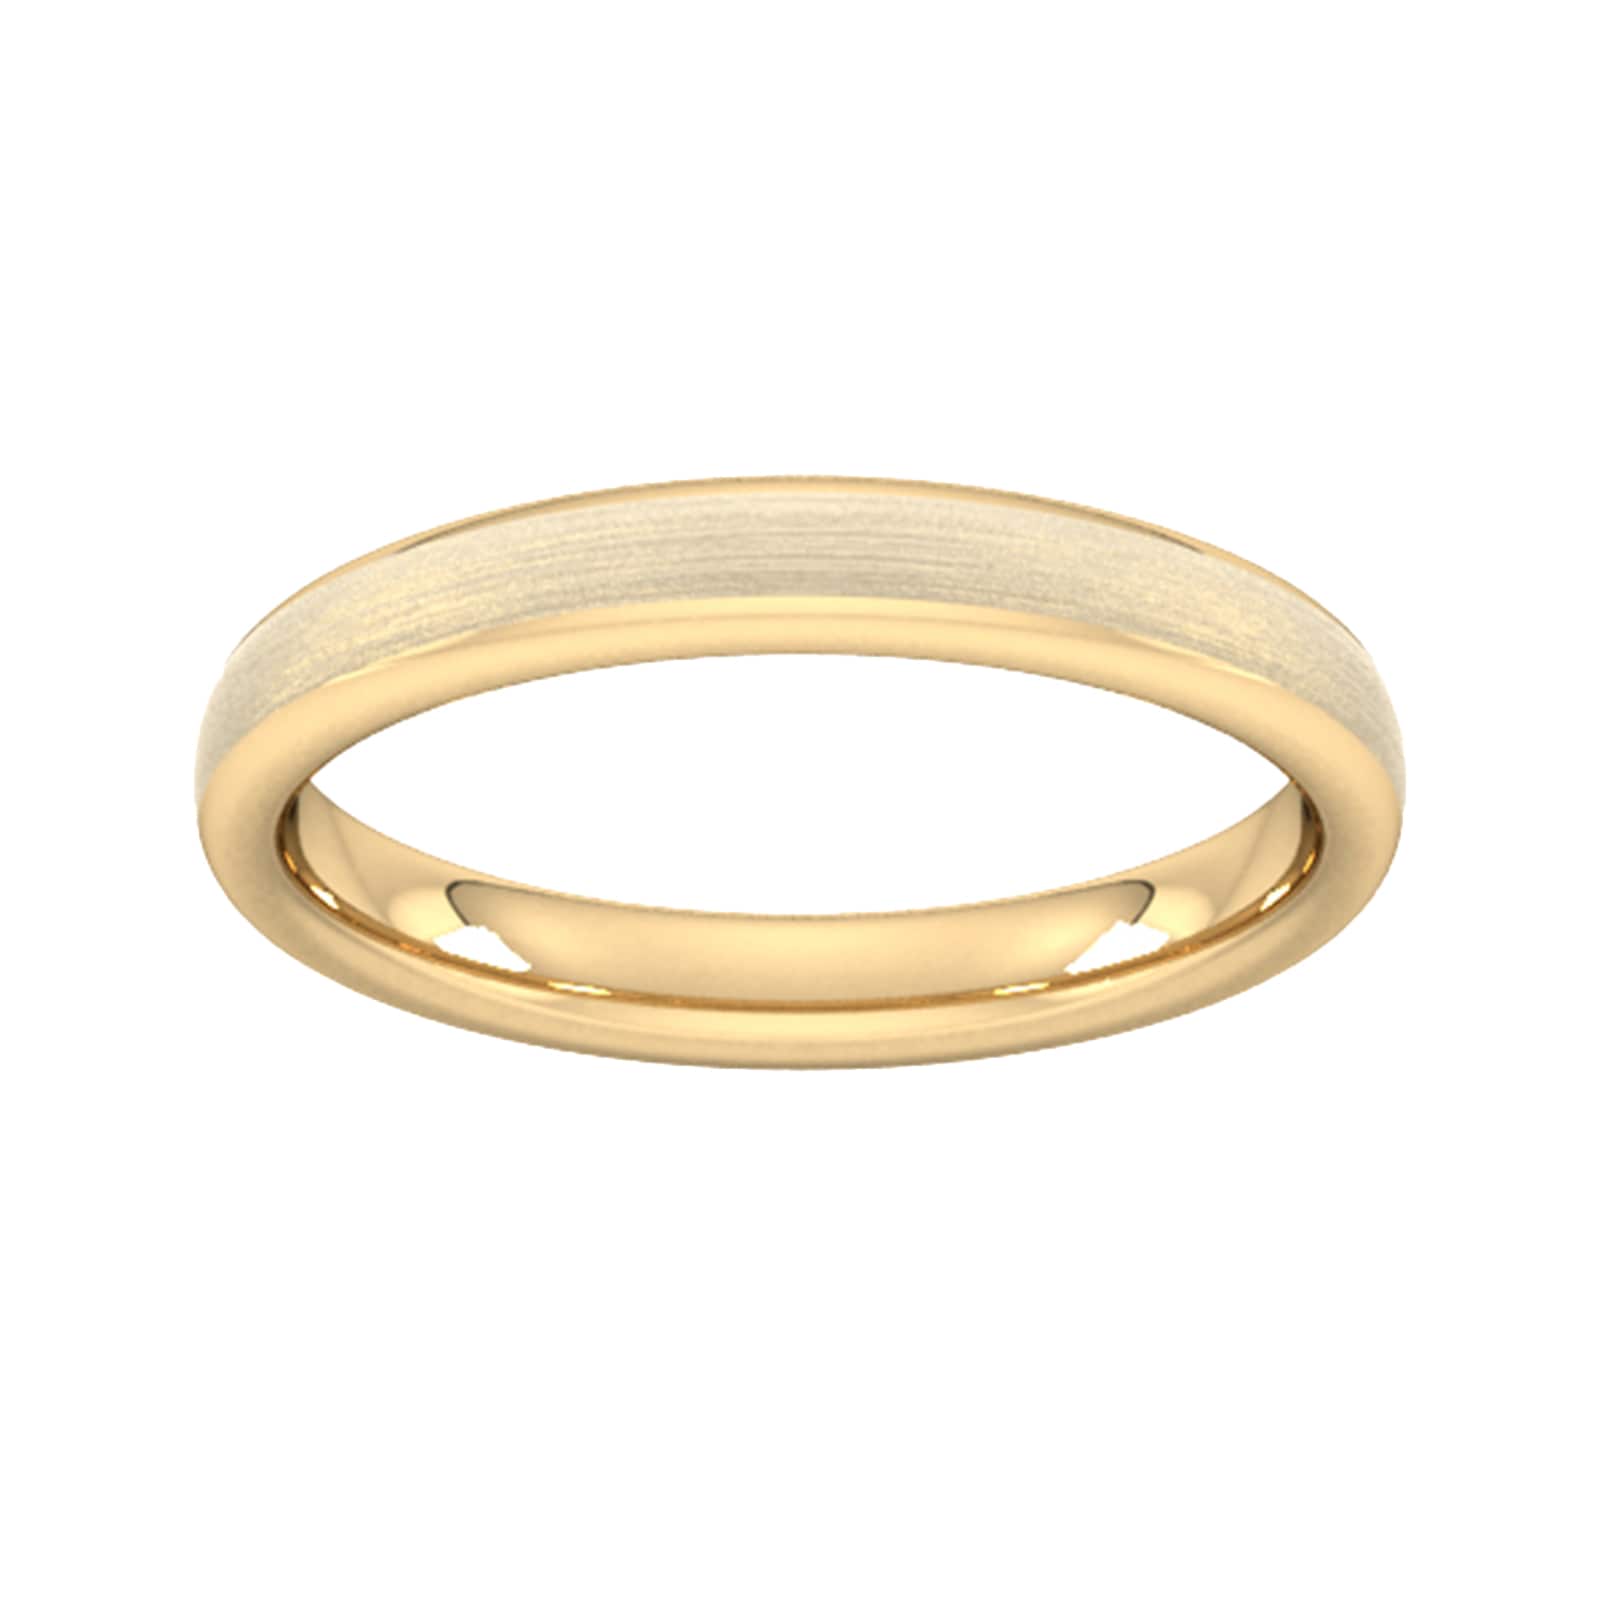 3mm Traditional Court Heavy Matt Finished Wedding Ring In 9 Carat Yellow Gold - Ring Size P